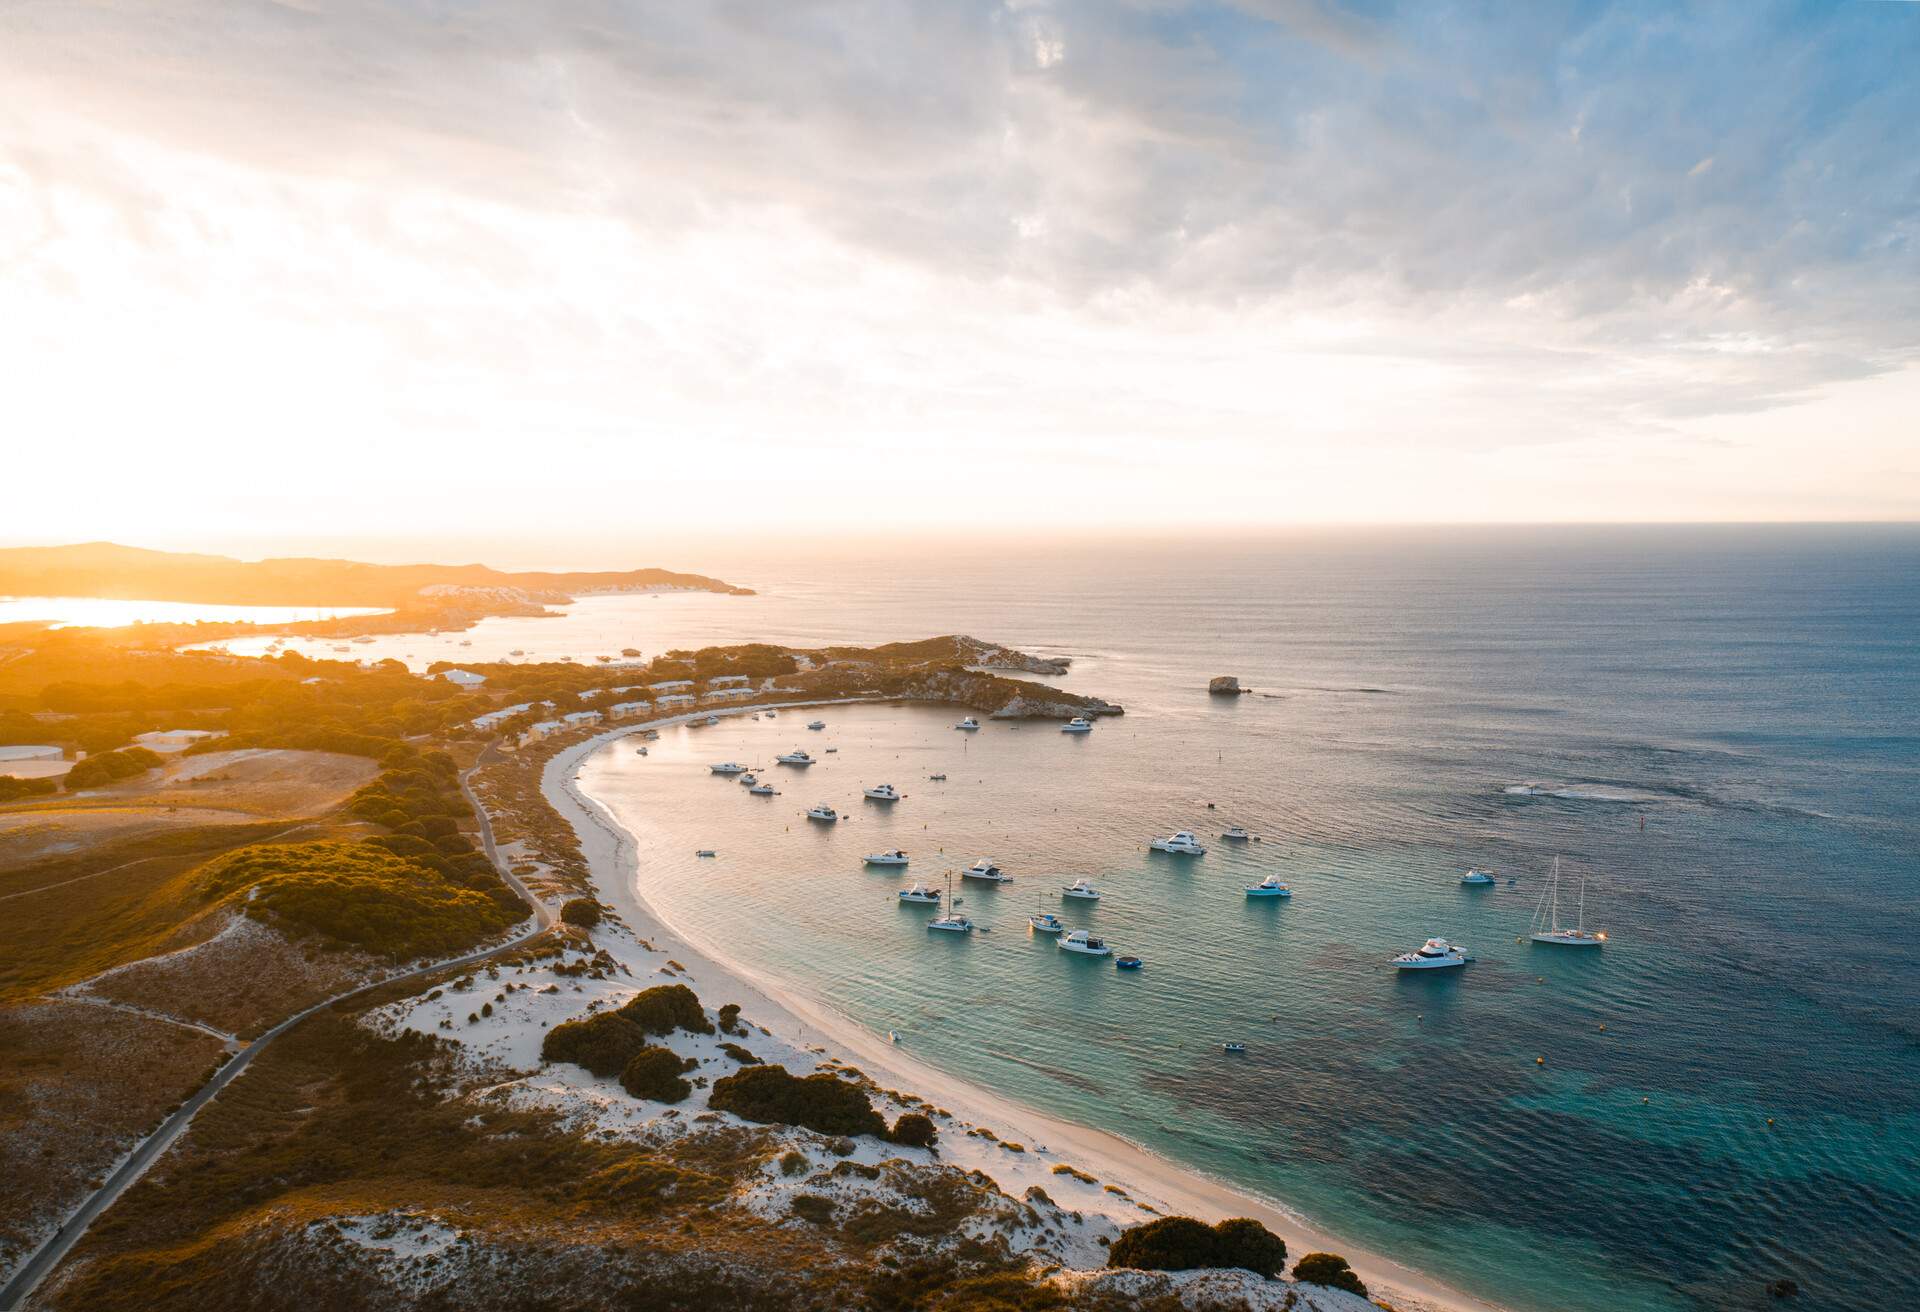 Aerial drone photo of Rottnest Island, Geordie Bay. Sunset in the background as the private boats park up for the night in the secluded and remote bay. ; Shutterstock ID 1684196053; Brand (KAYAK, Momondo, Any): KAYAK